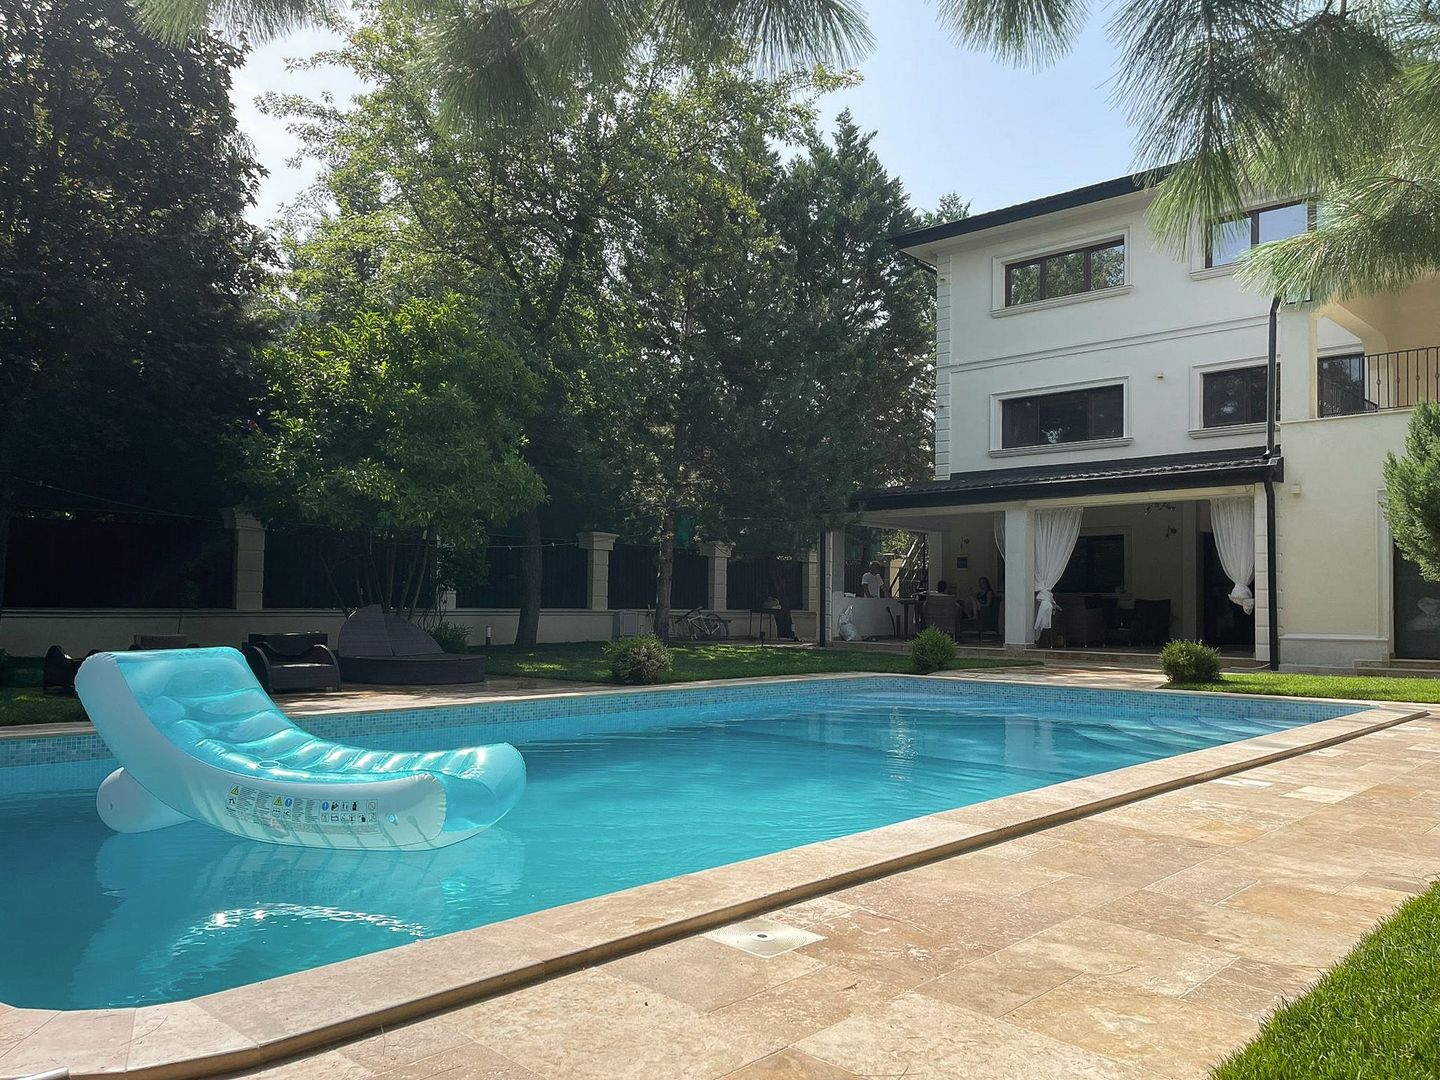 Elegance in the Exceptional Villa | Villa with pool and impressive courtyard